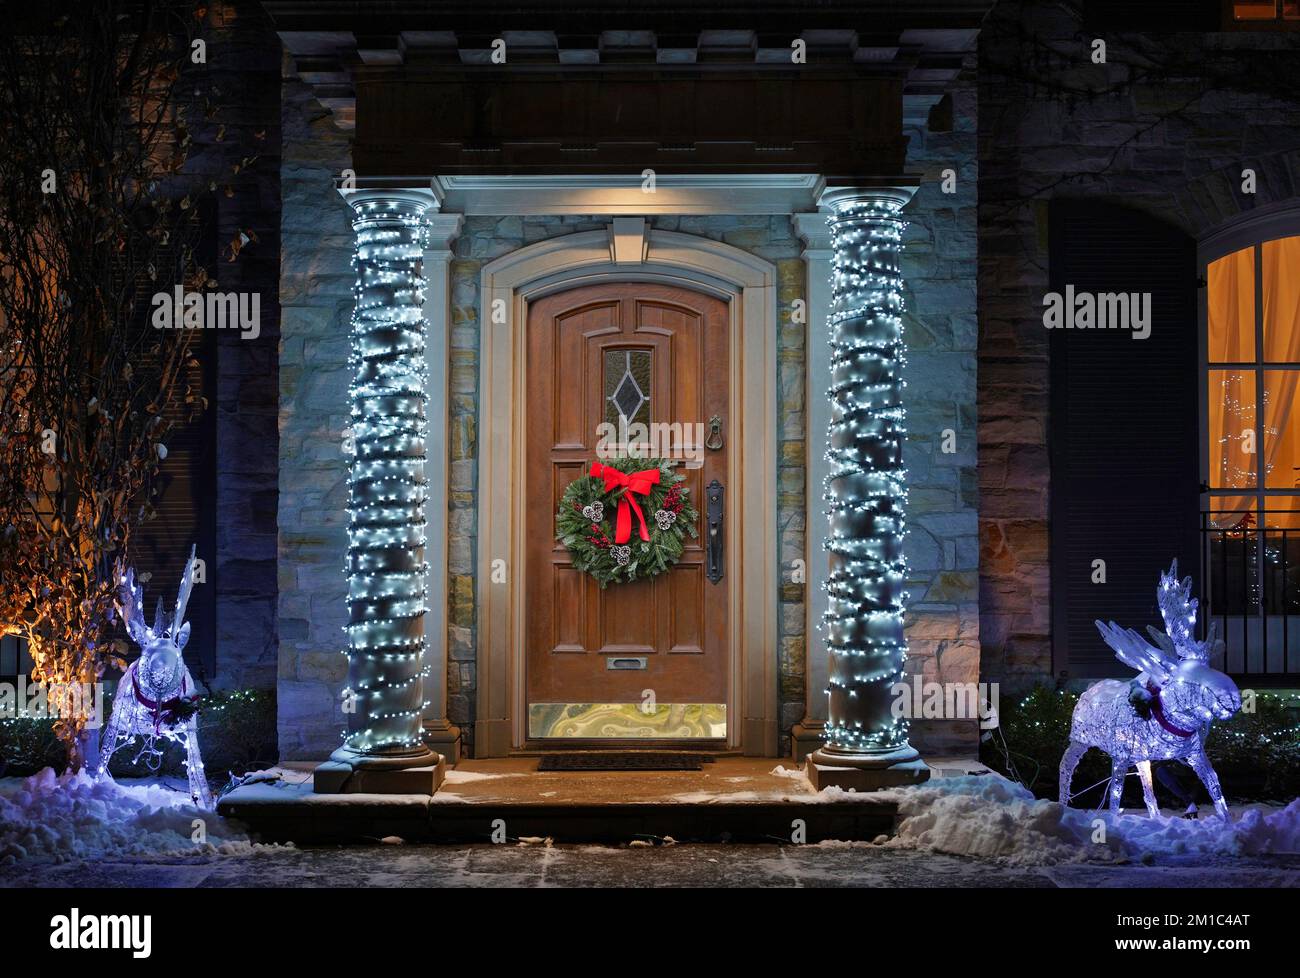 House front door decorated for Christmas Stock Photo